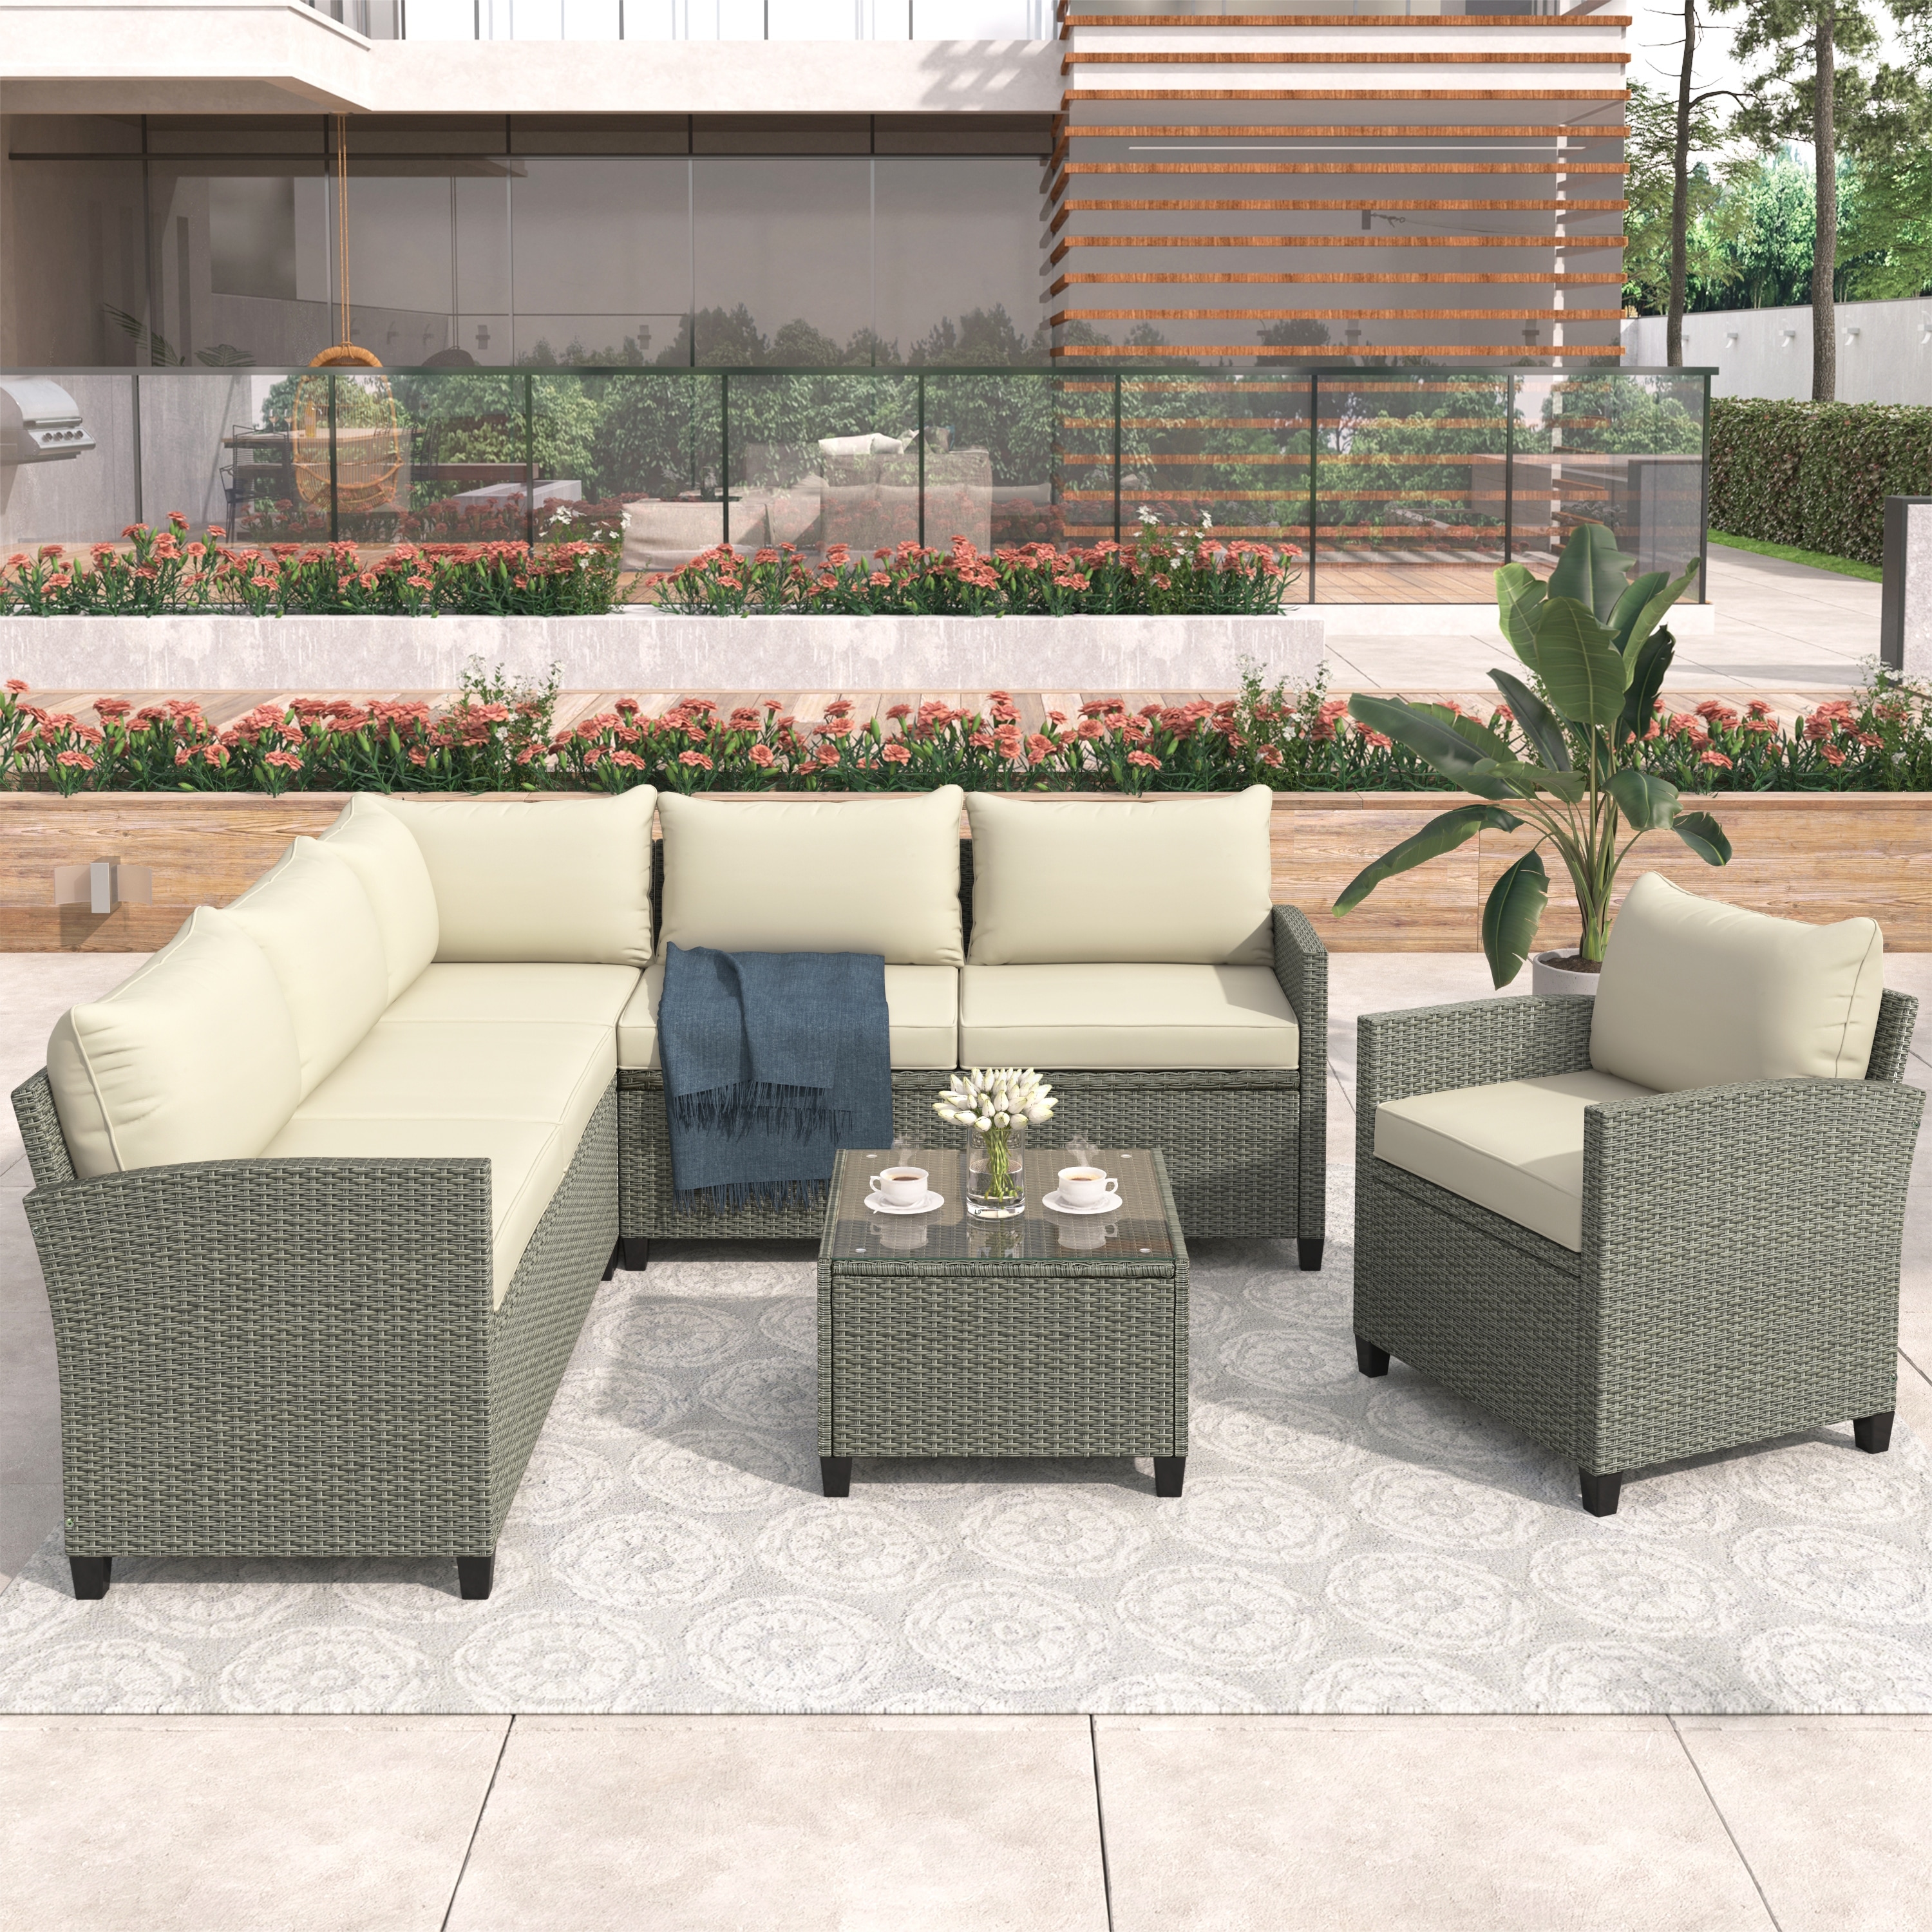 Patio Furniture Set 5 Piece Outdoor Conversation Set With Coffee Table And Single Cushions Chair For Patio/ Porch/ Poolside